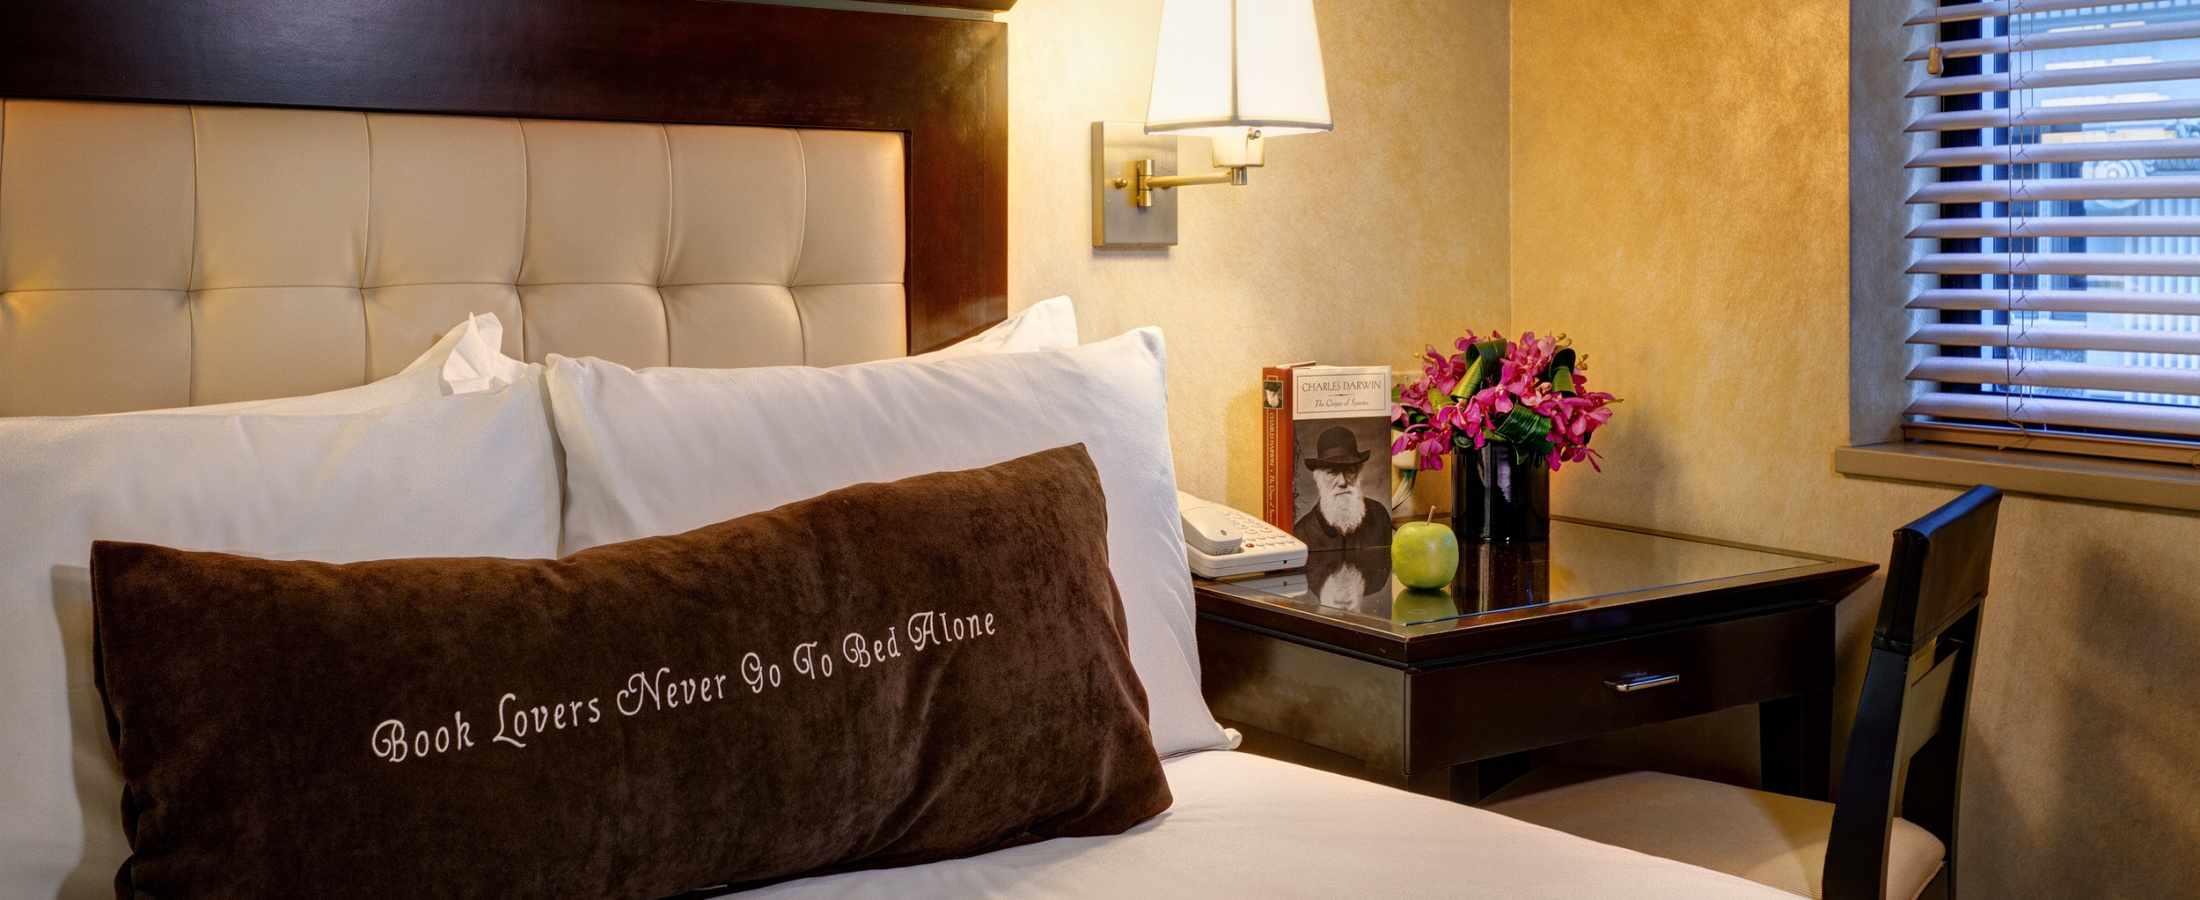 Signature Pillow at Library Hotel quoting "Book Lovers Never Go to Bed Alone"